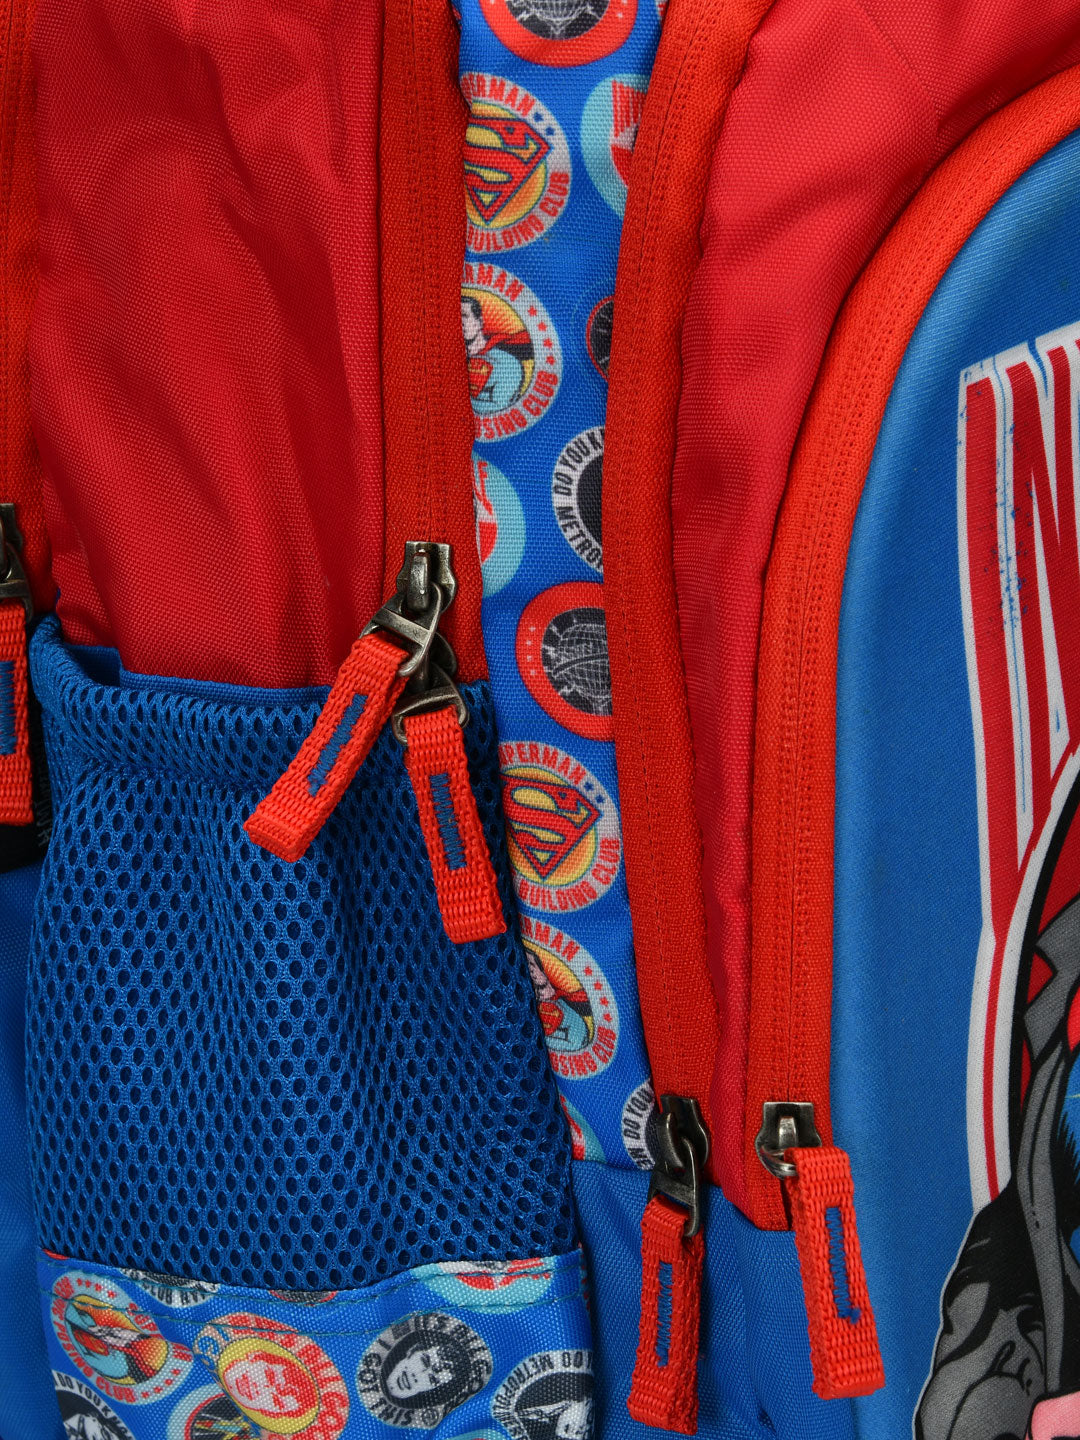 Spiderman Themed School Bag, Gifts for Kids